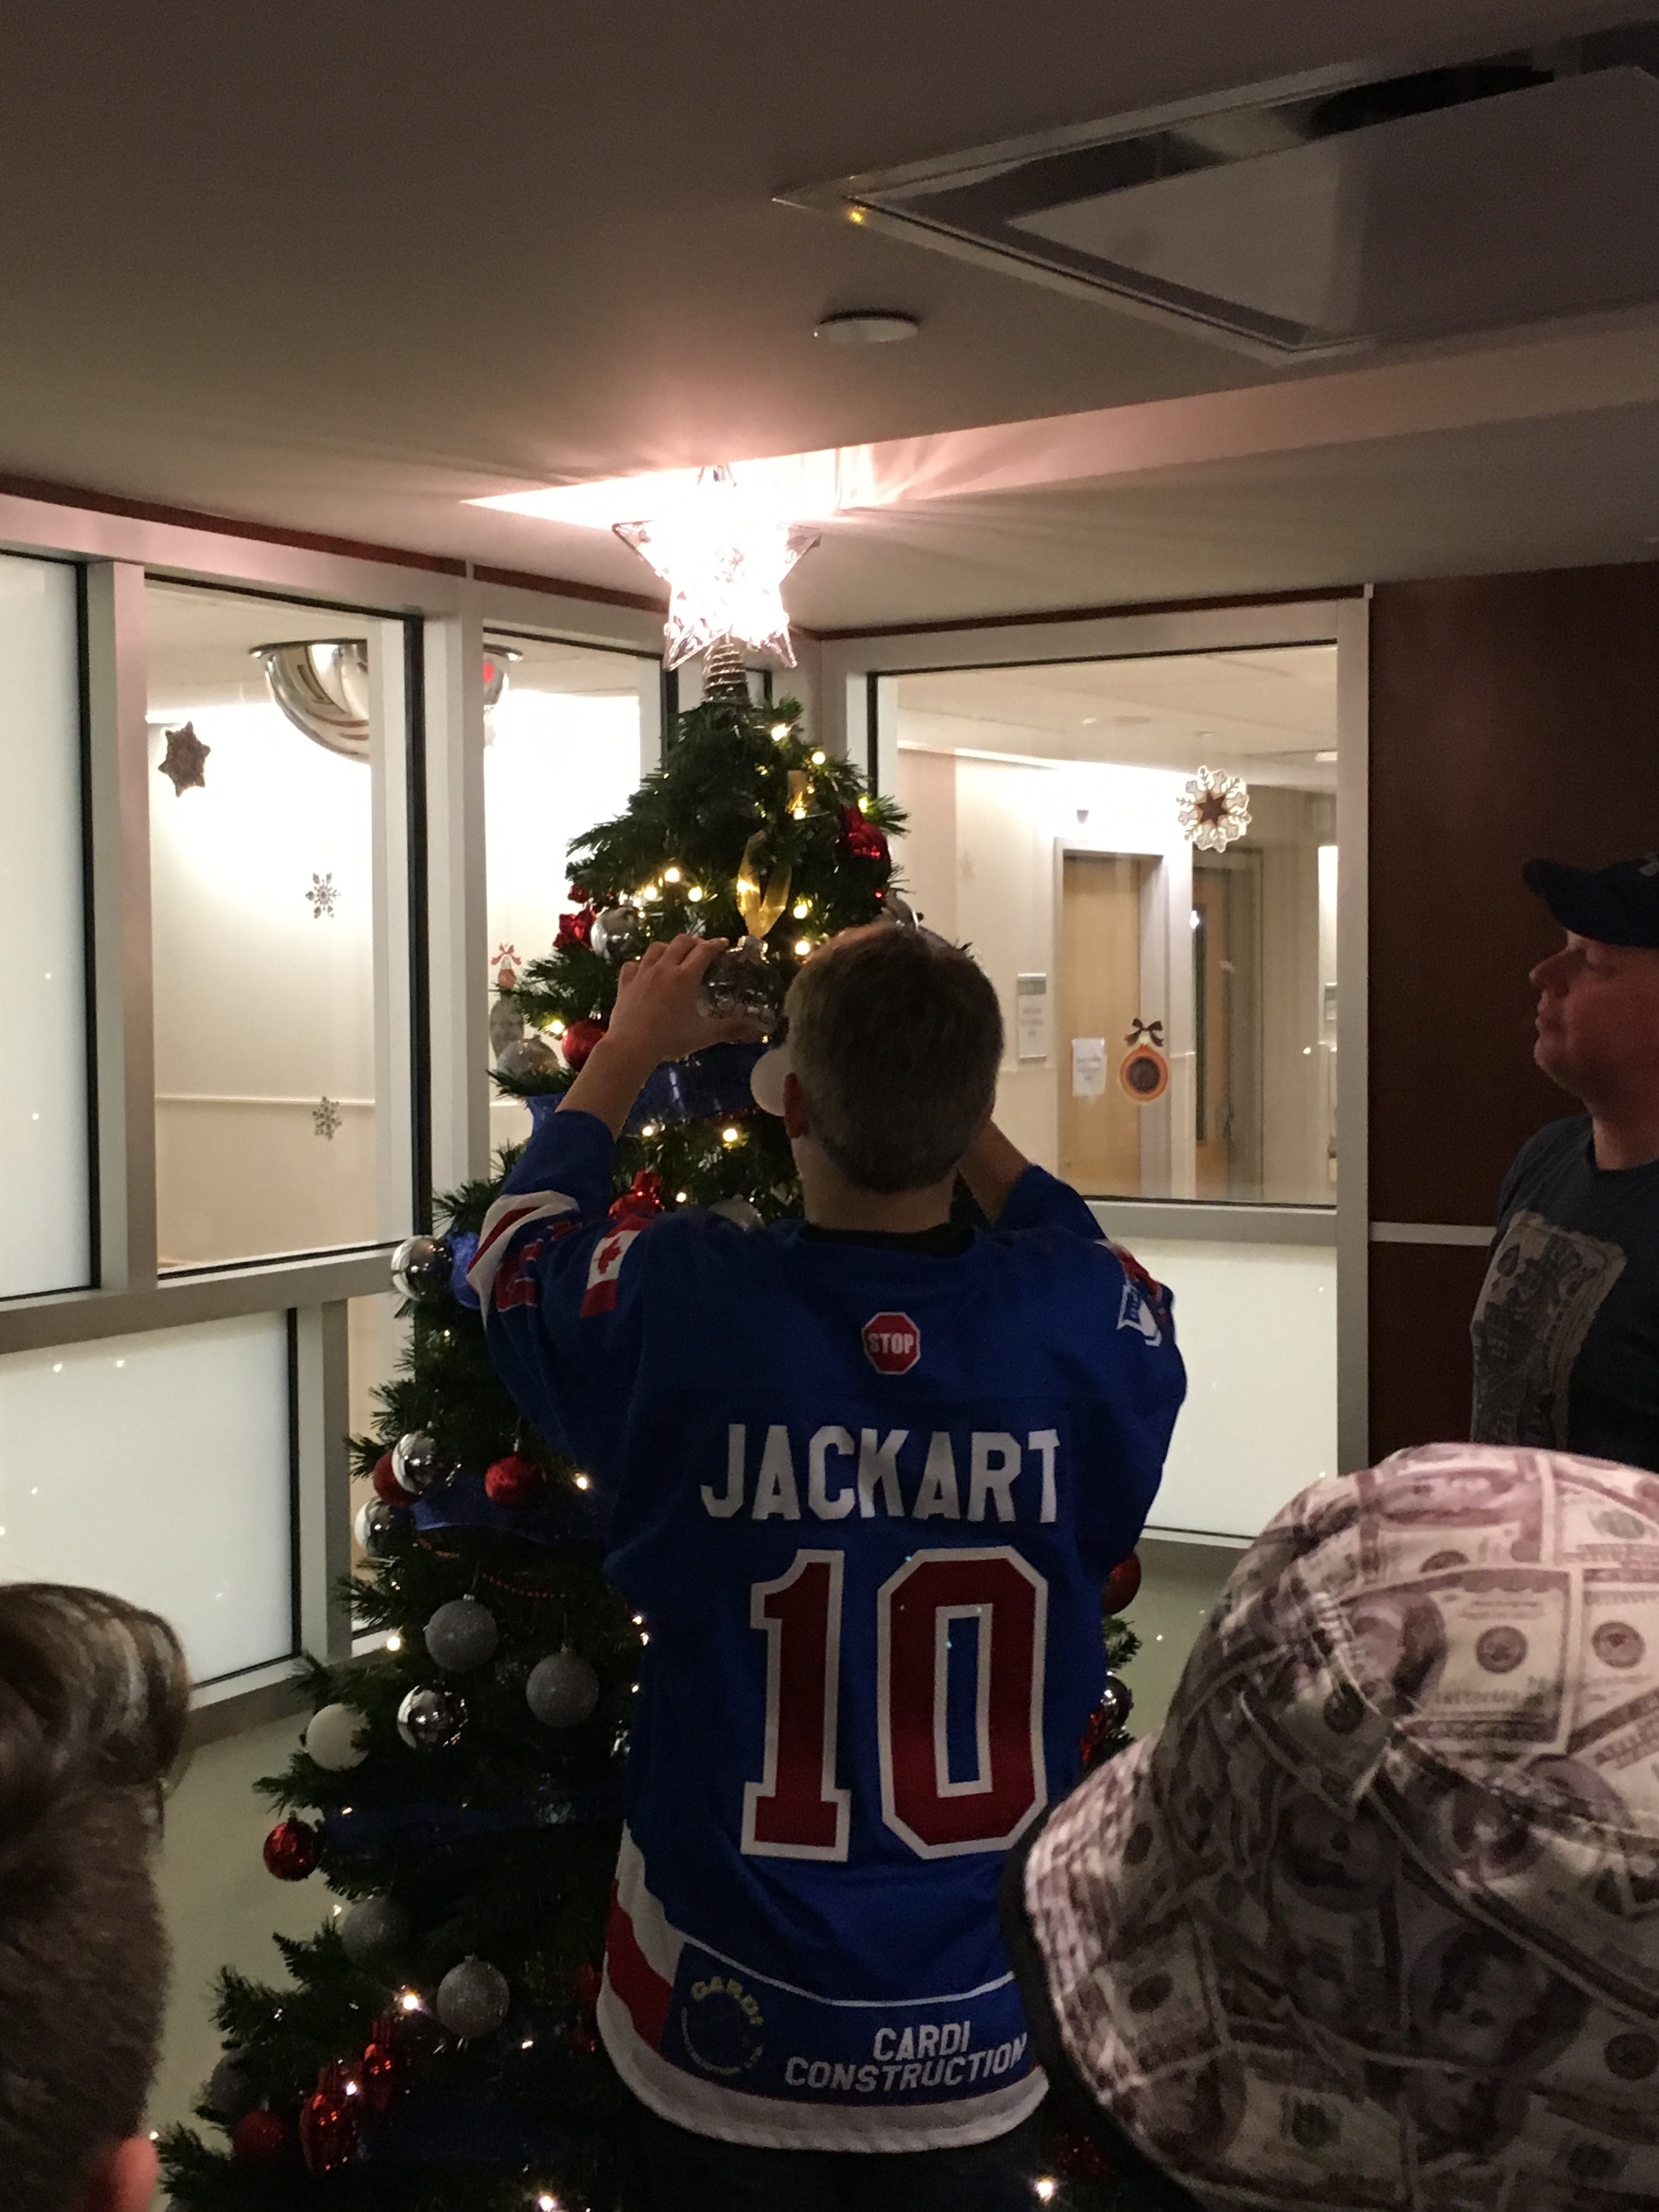 Steven places an ornament on the tree in honour of his dad, Steve Jackart